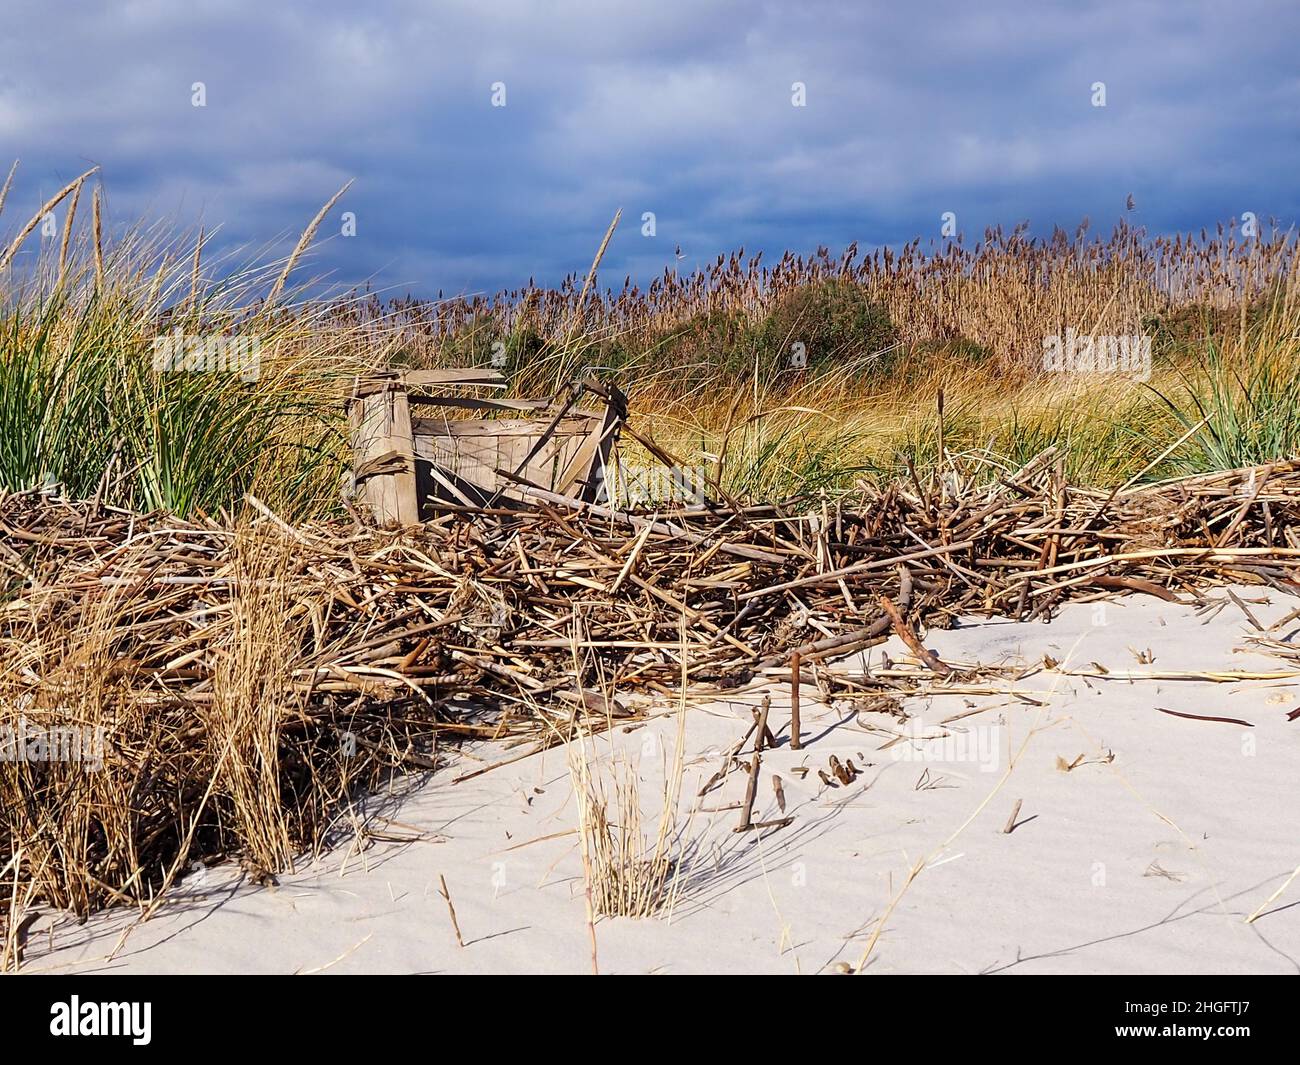 An old,  falling apart wooden bushel basket for crabs sits in a pile of sticks and tidal detritus on an empty beach on a winter day. Stock Photo